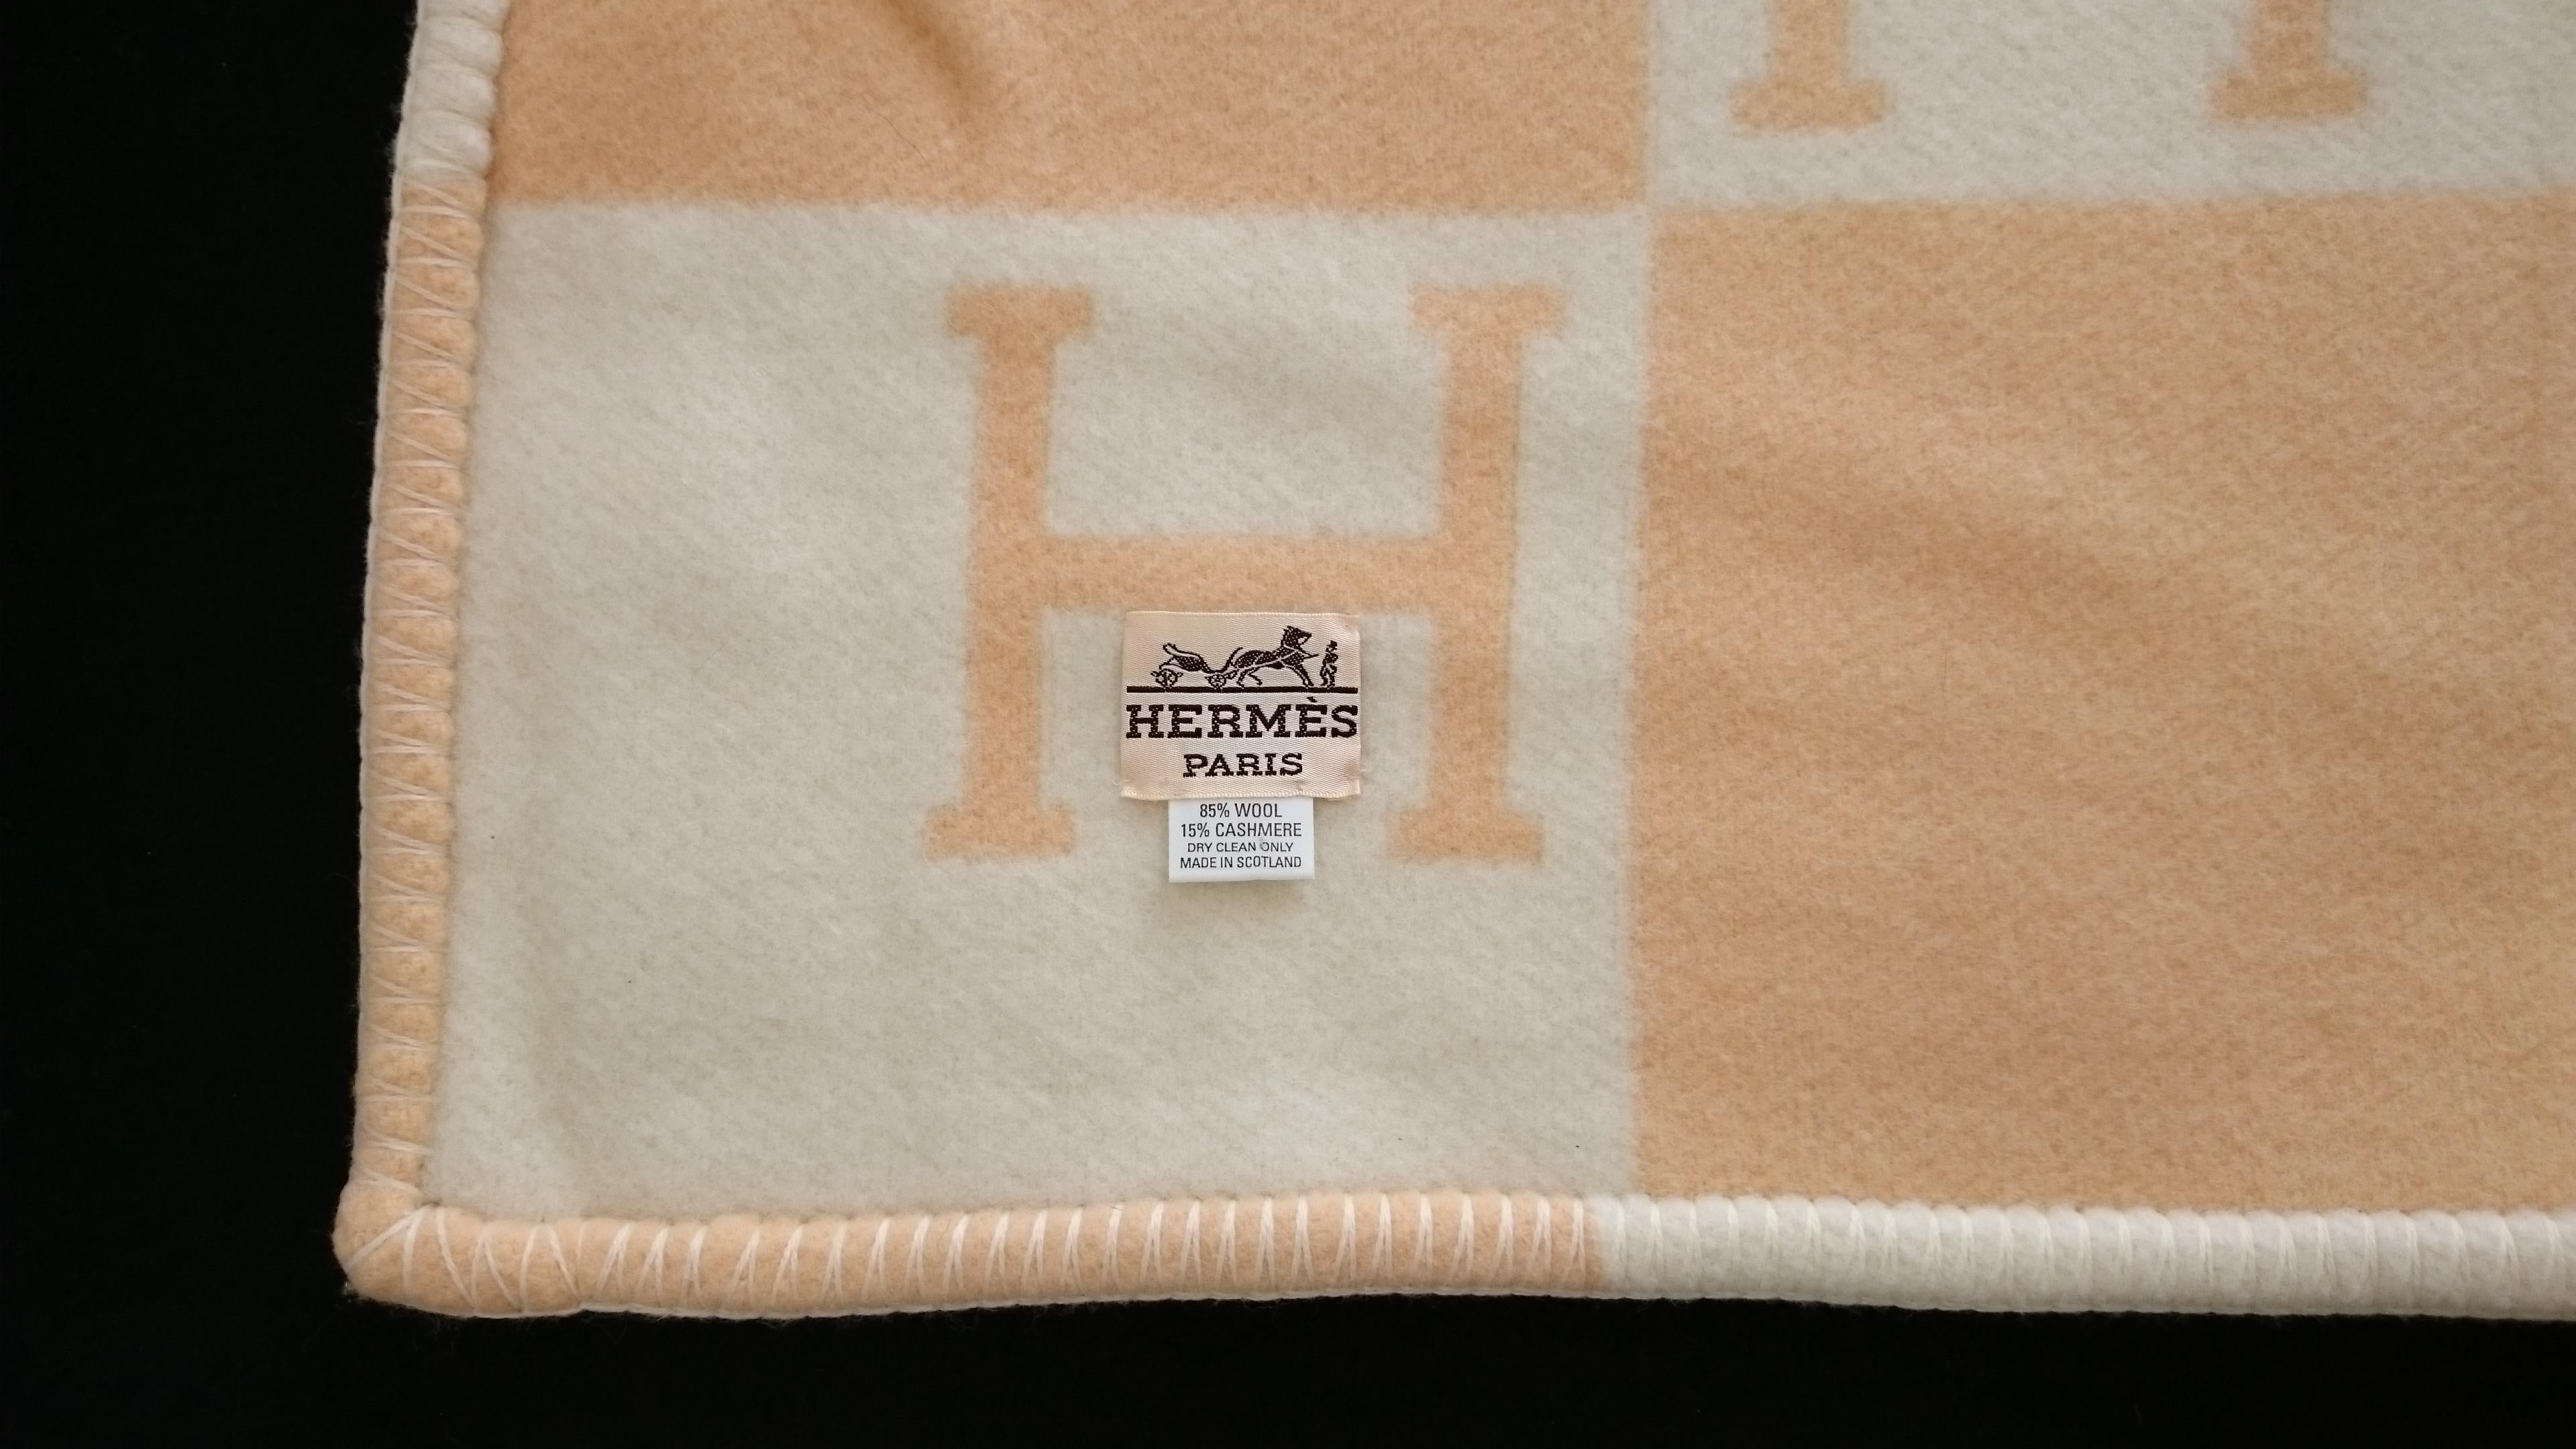 Light-Yellow Avalon Hermès Blanket
140 x 110 cm (55.1 x 43.3 Inches)
85% Wool
15% Cashmere 
Made in Scotland